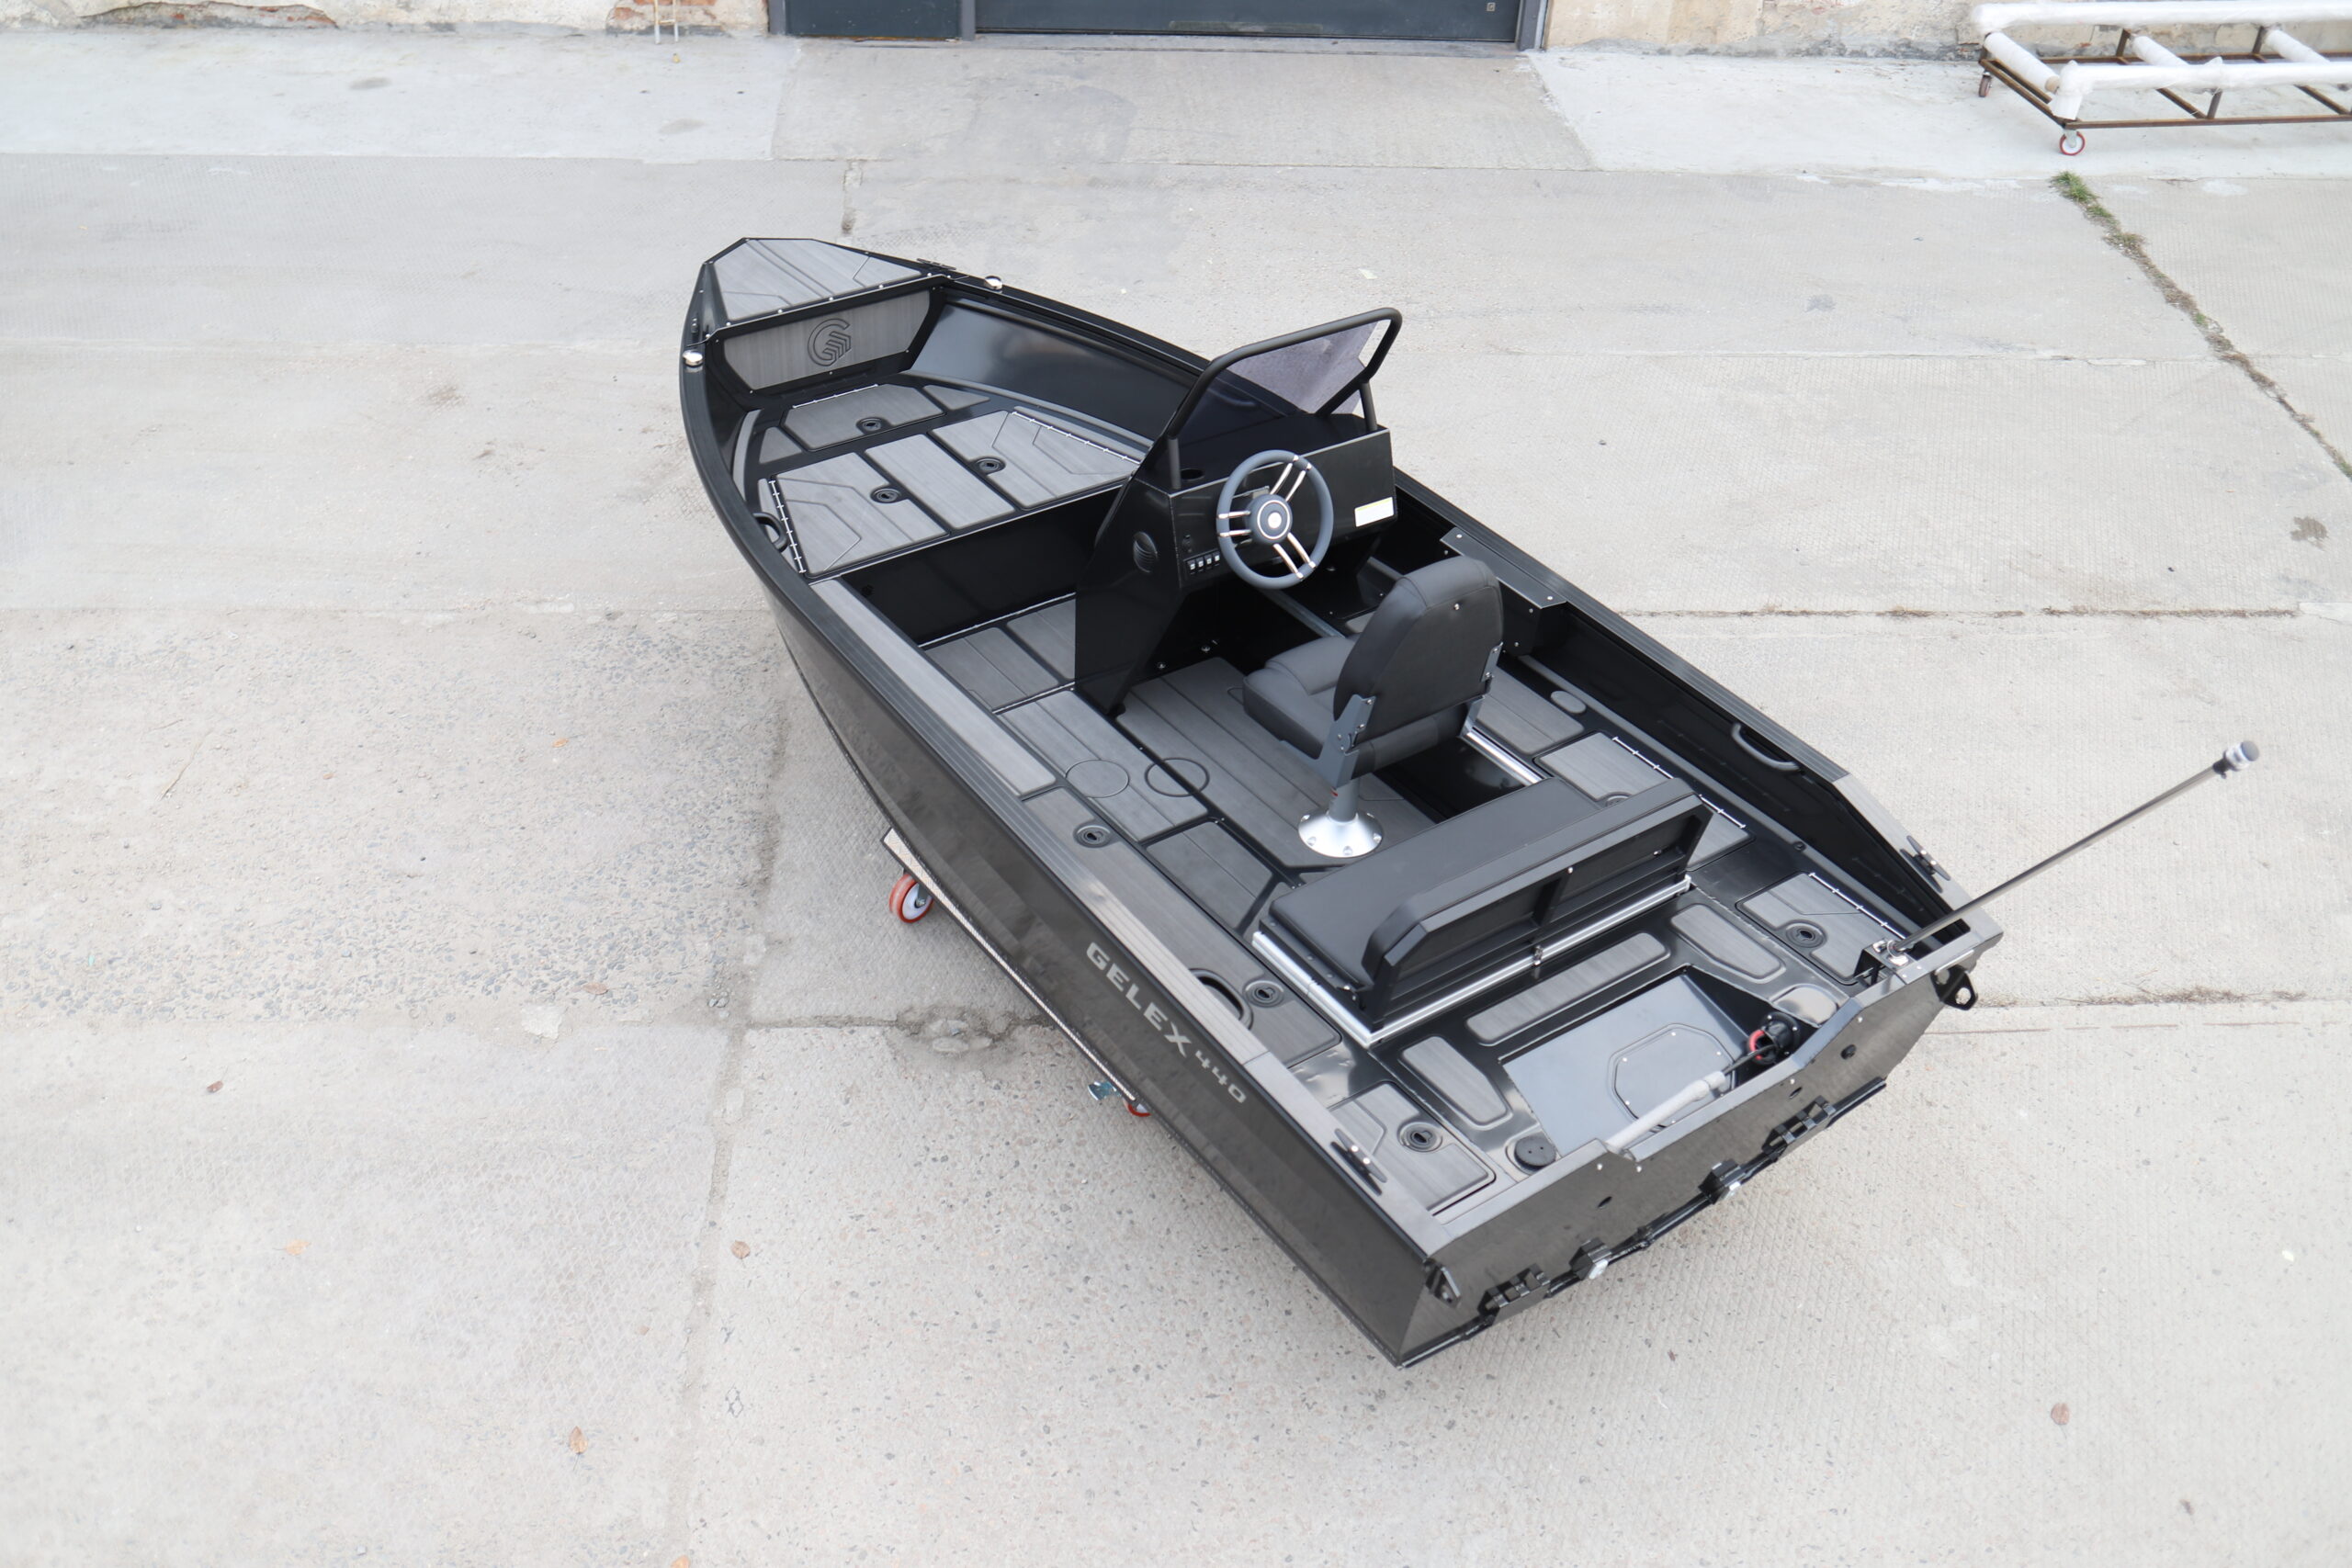 GELEX - aluminum boats for fishing and outdoor activities in the water